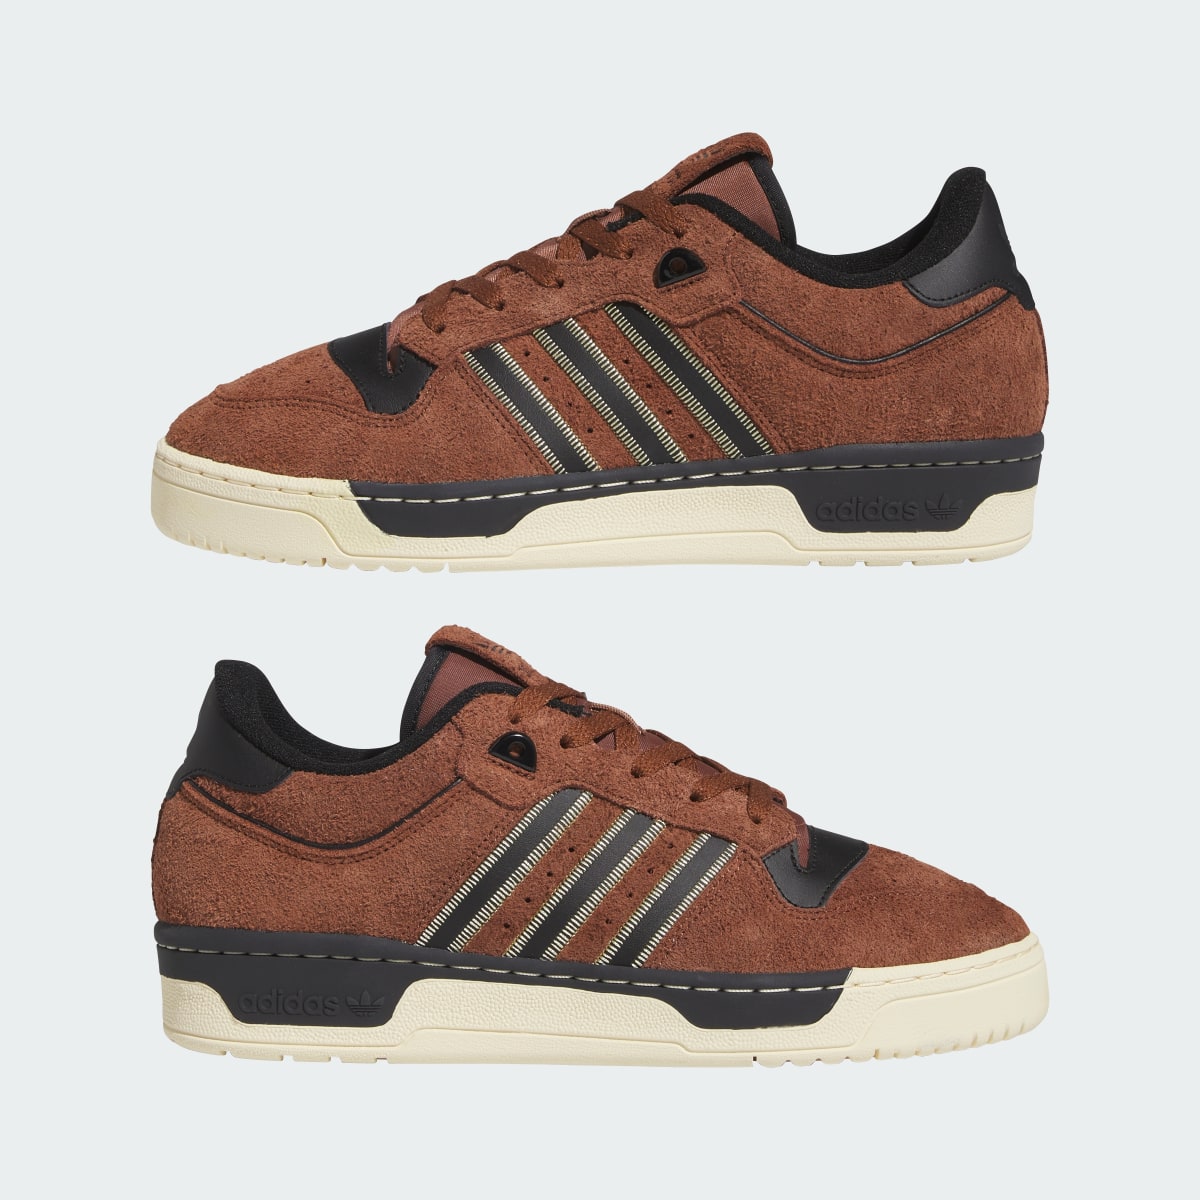 Adidas Rivalry 86 Low Schuh. 8